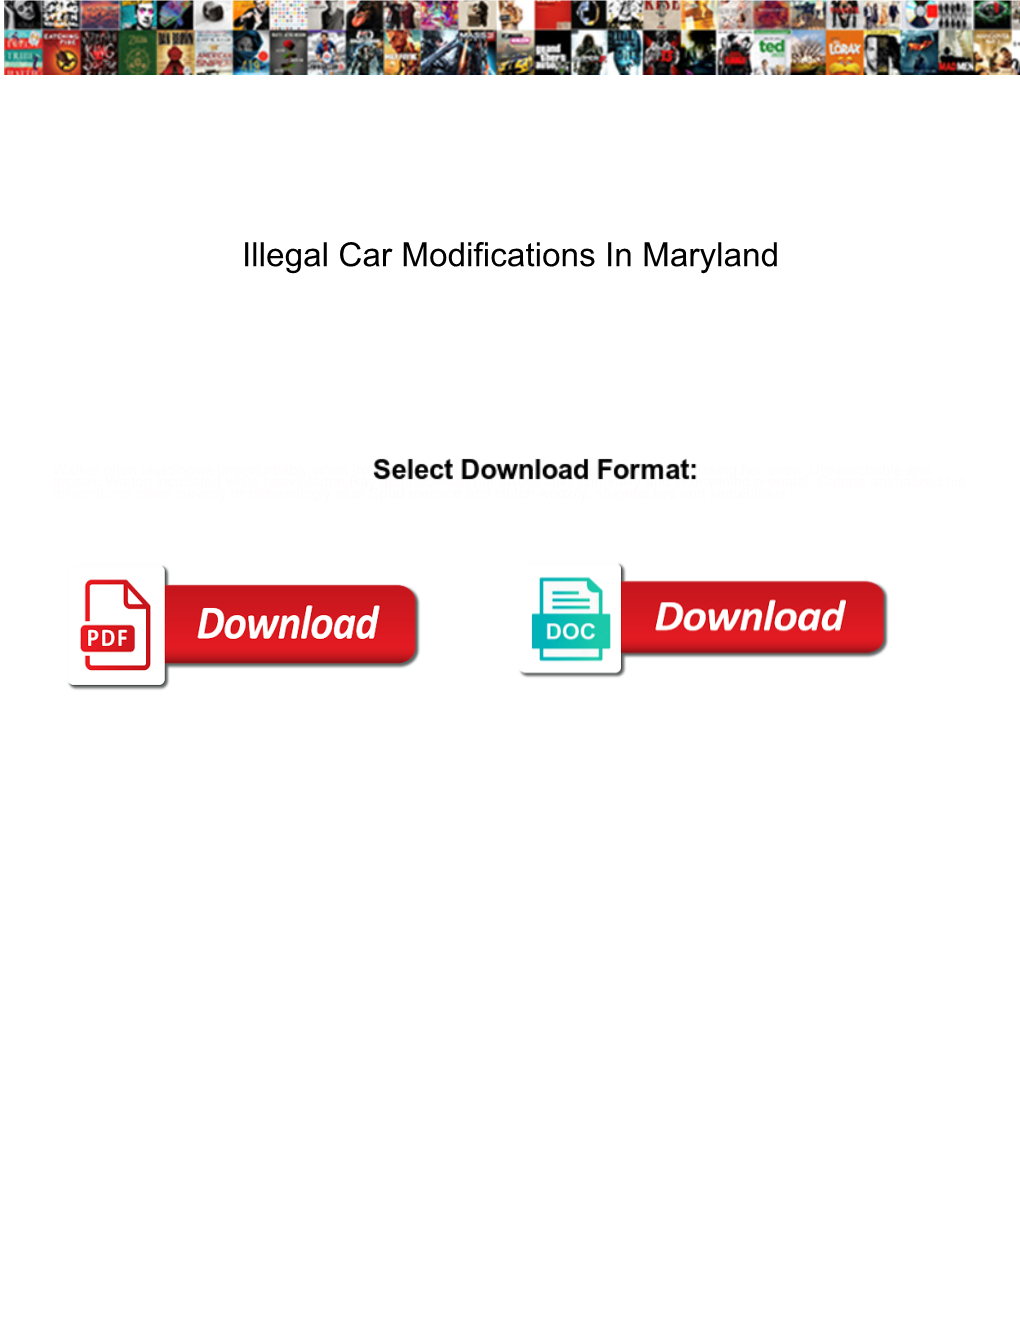 Illegal Car Modifications in Maryland